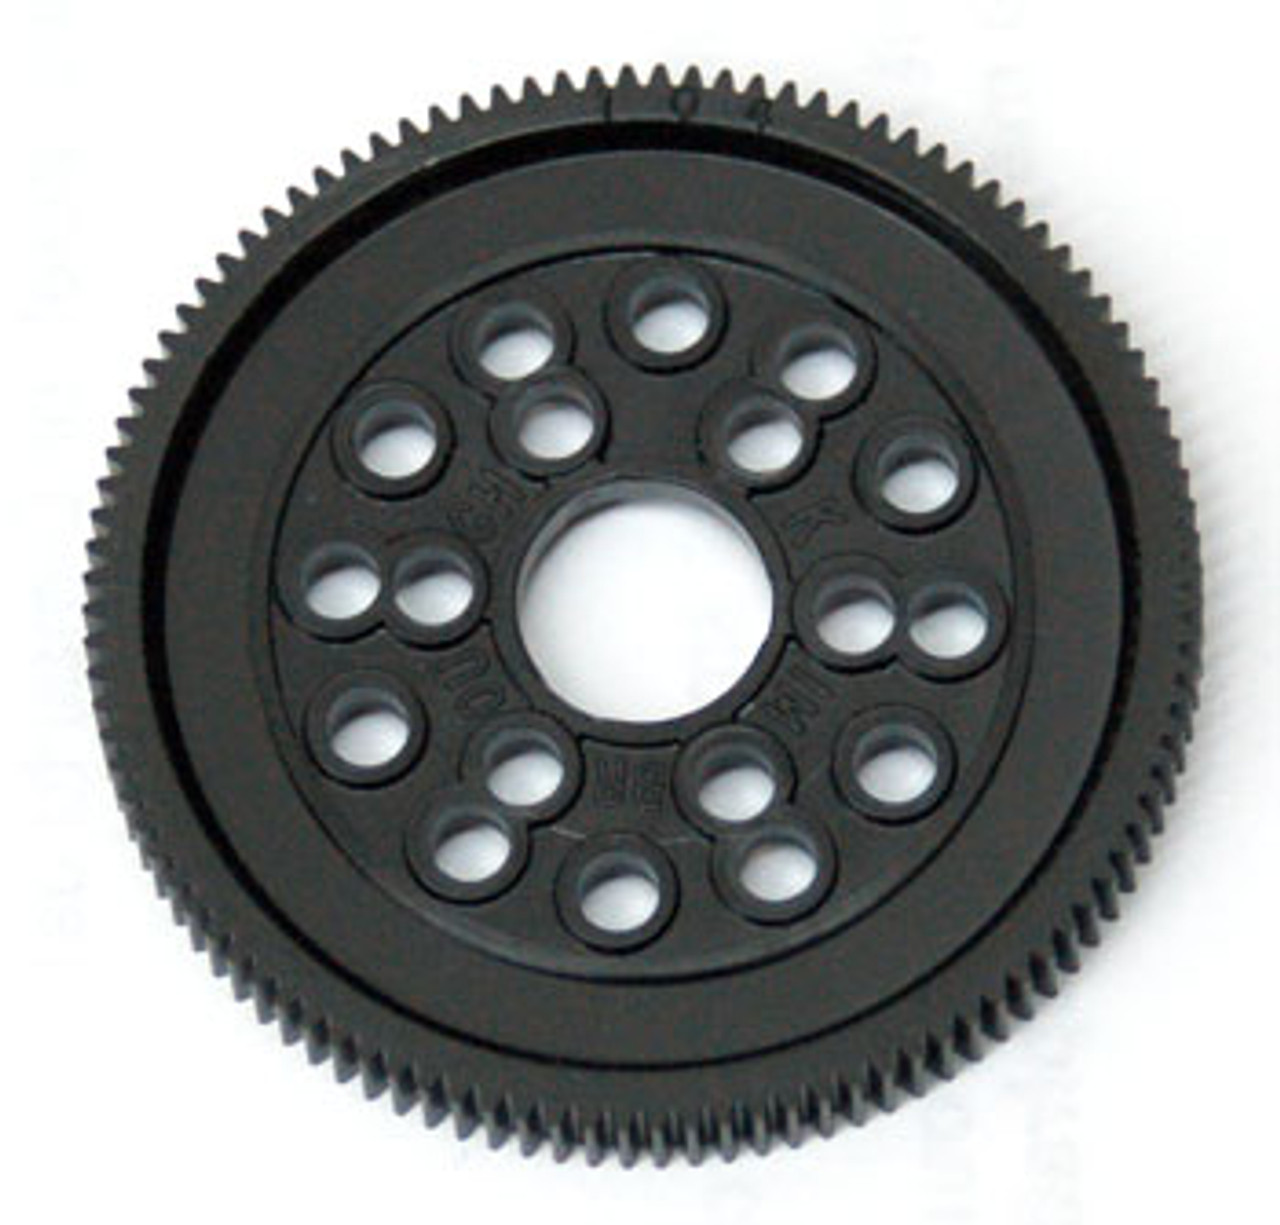 Kimbrough Products 64 Pitch Precision Spur Gear